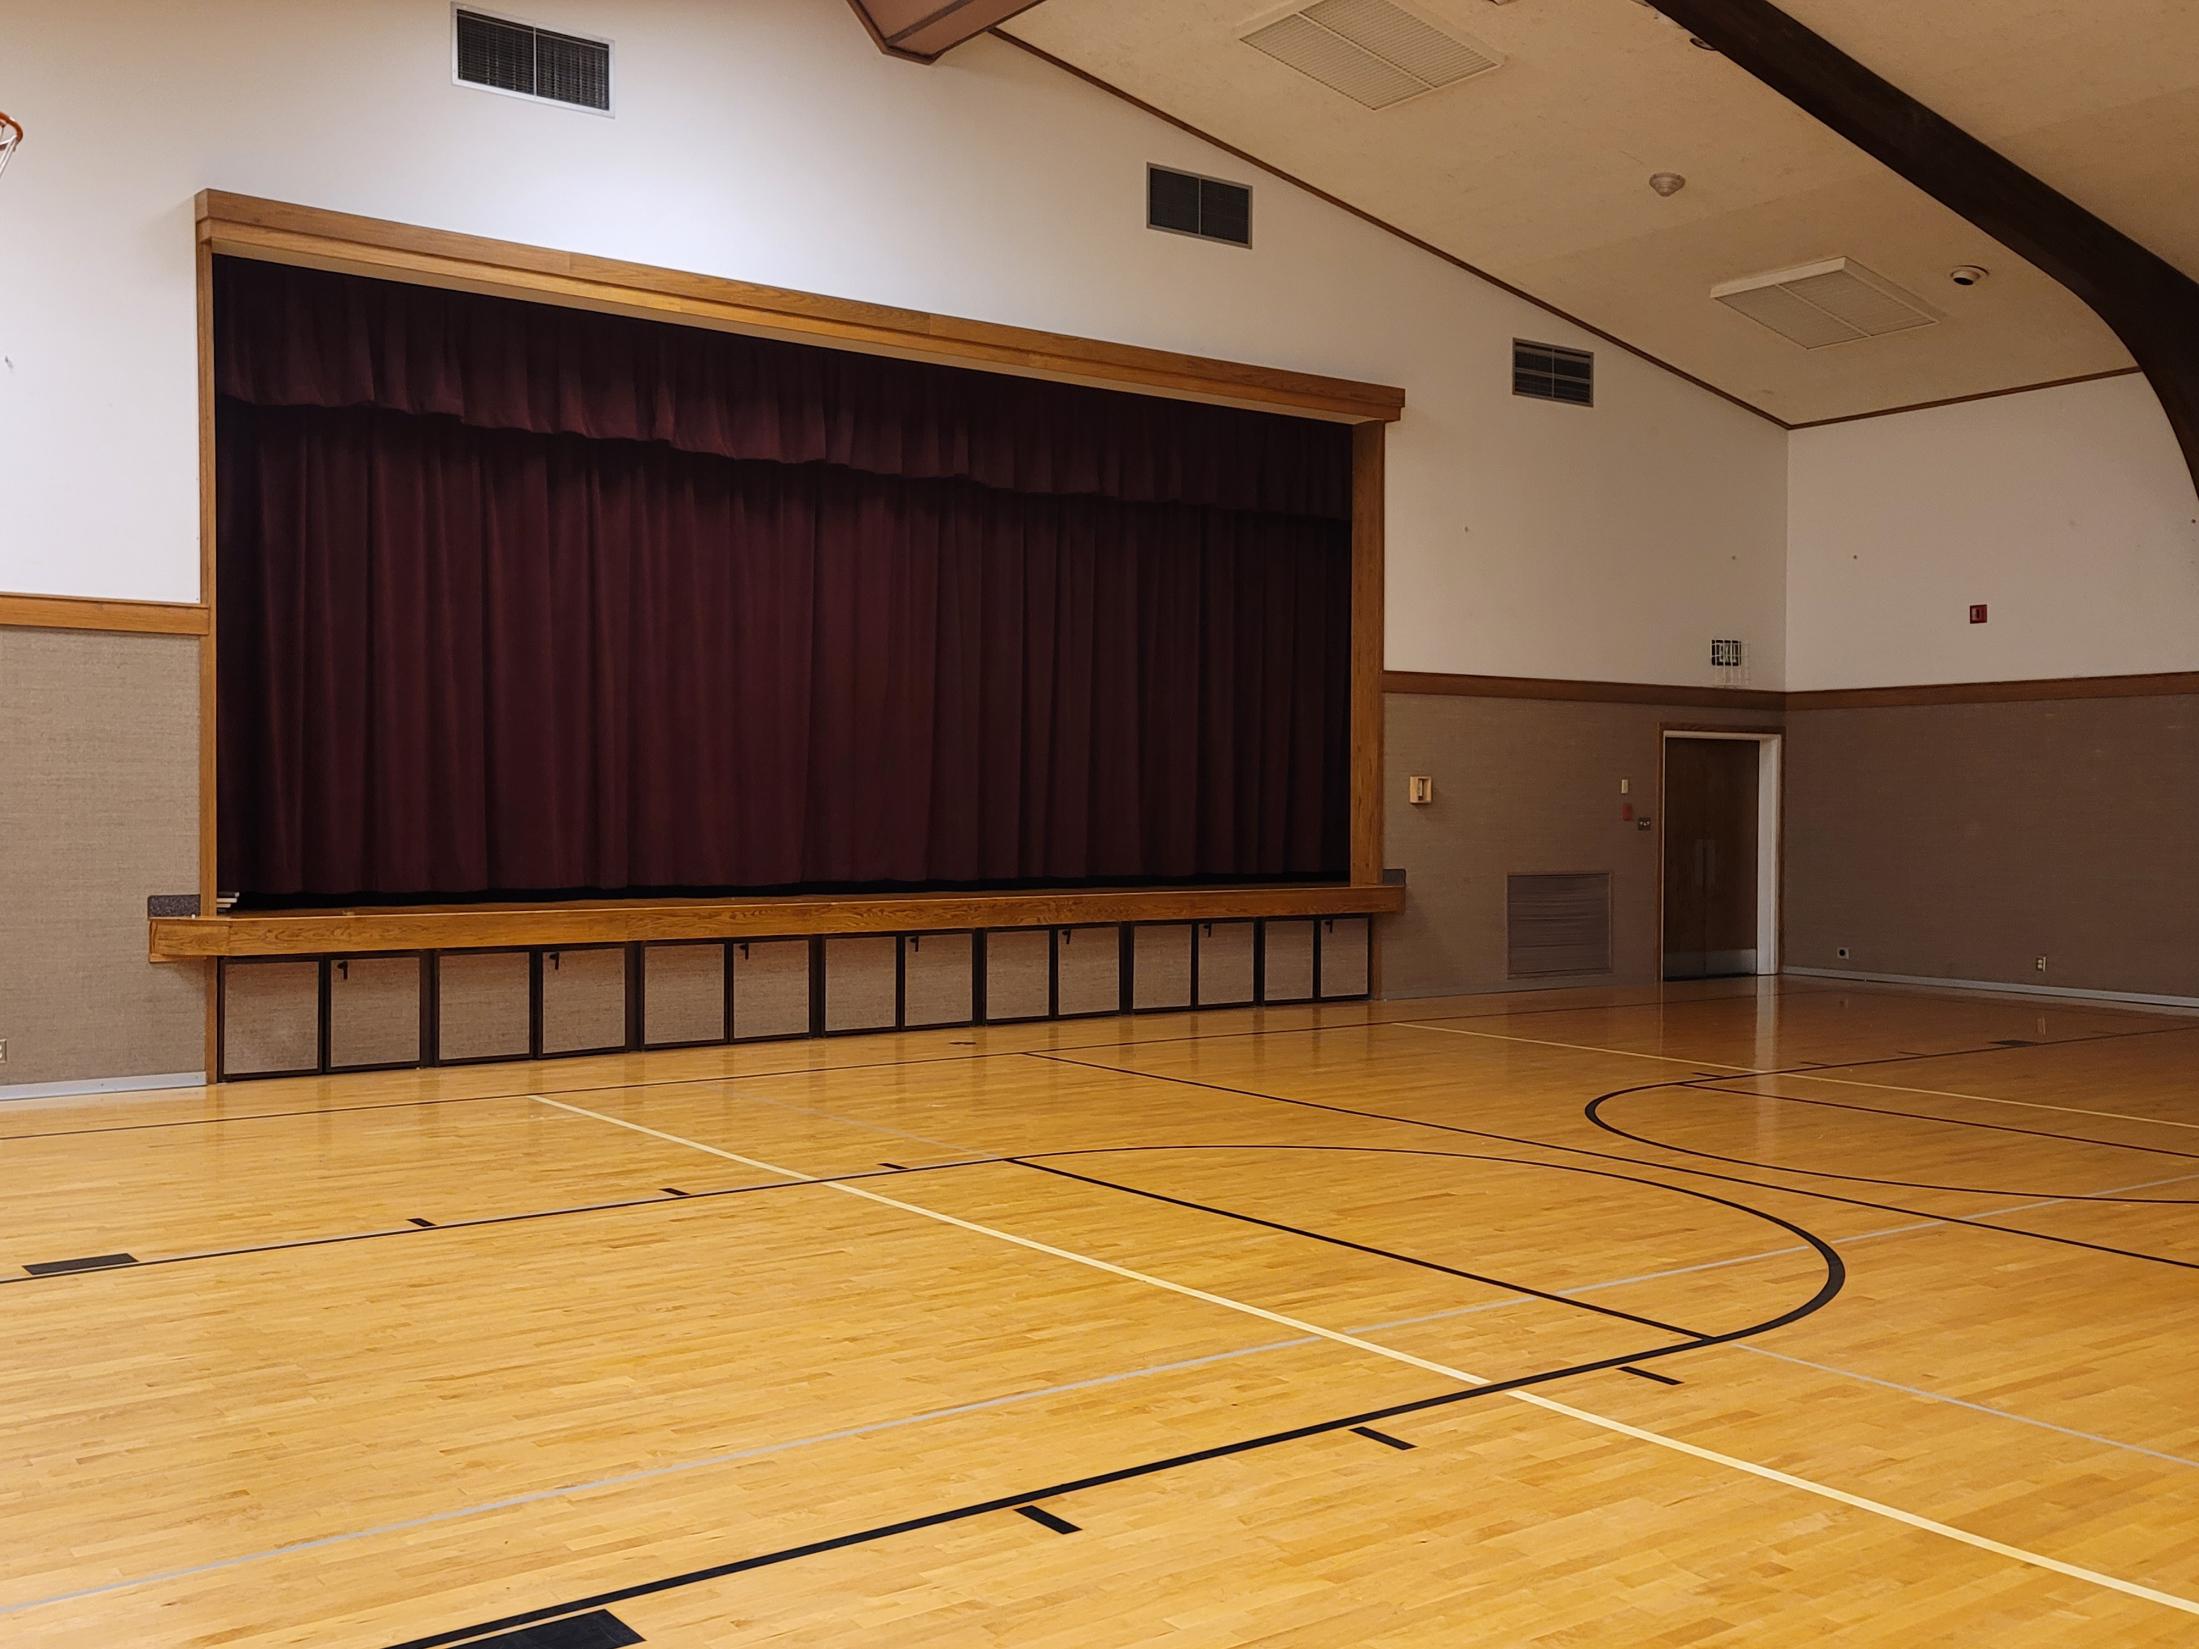 Gym/cultural hall of The Church of Jesus Christ of Latter-day Saints